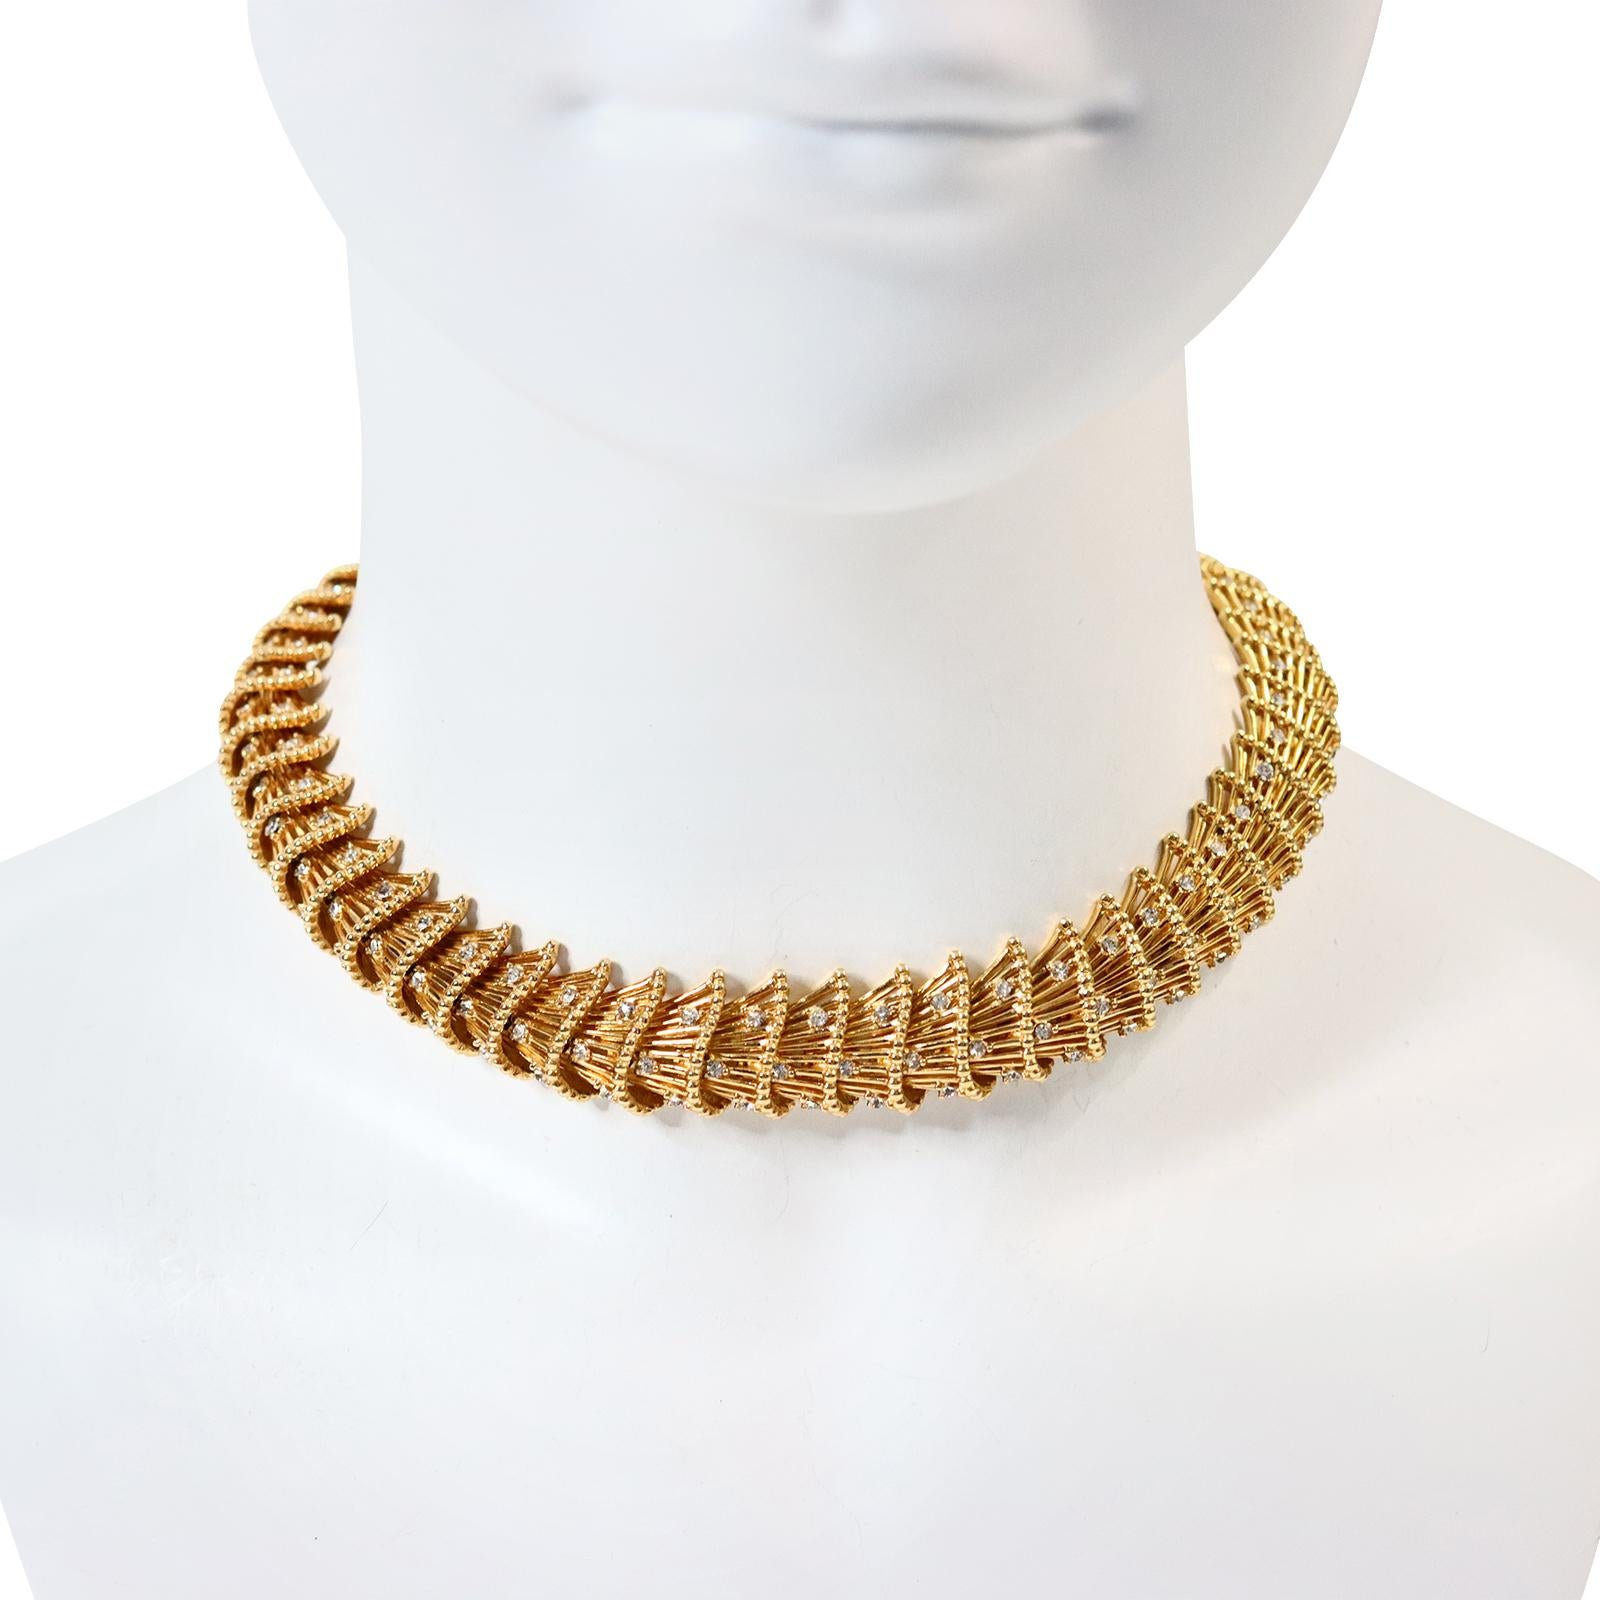 Vintage Boucher Gold and Crystal Fan Like Necklace Circa 1960s.  Fan like pieces with round stones fall into place onto the next one in a pattern that forms this beautiful classic or edgy necklace.  Depends on the way you look at it. Hard to believe